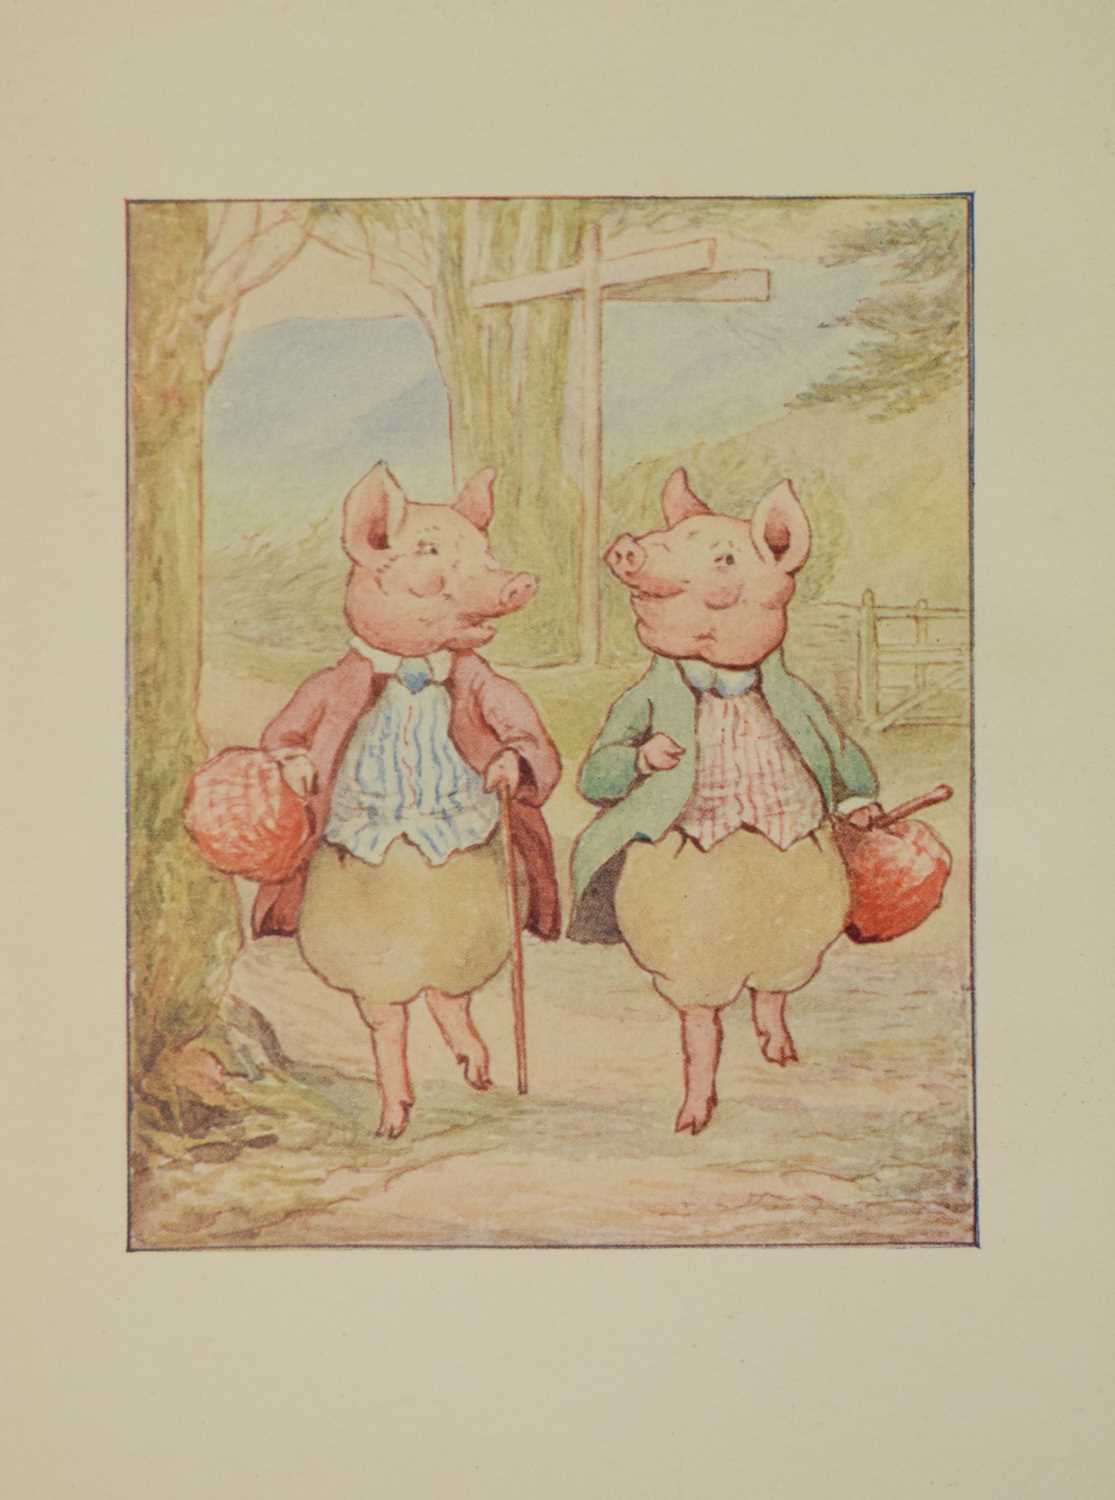 Potter, Beatrix - 'The Tale of Pigling Bland' - First edition 1913 - Image 7 of 19